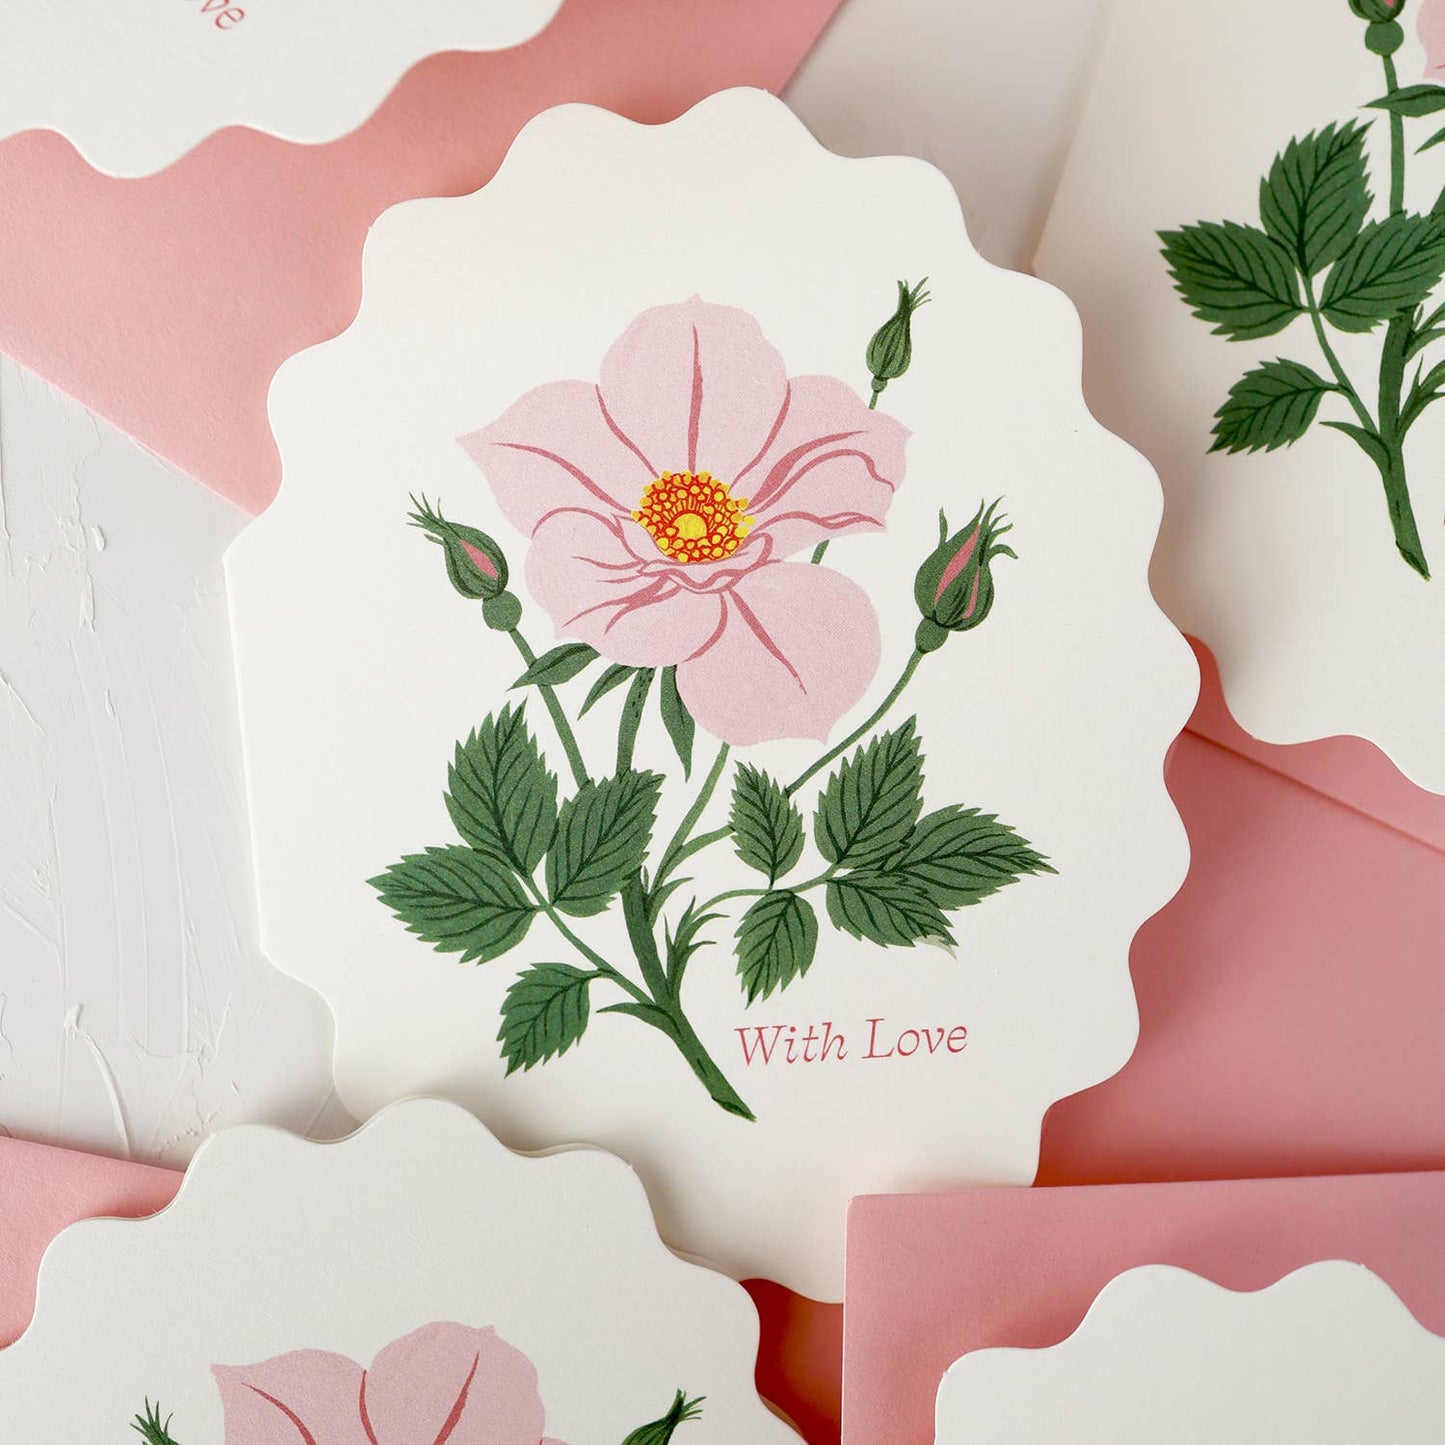 WITH LOVE, WILD ROSE | Valentine's greeting card